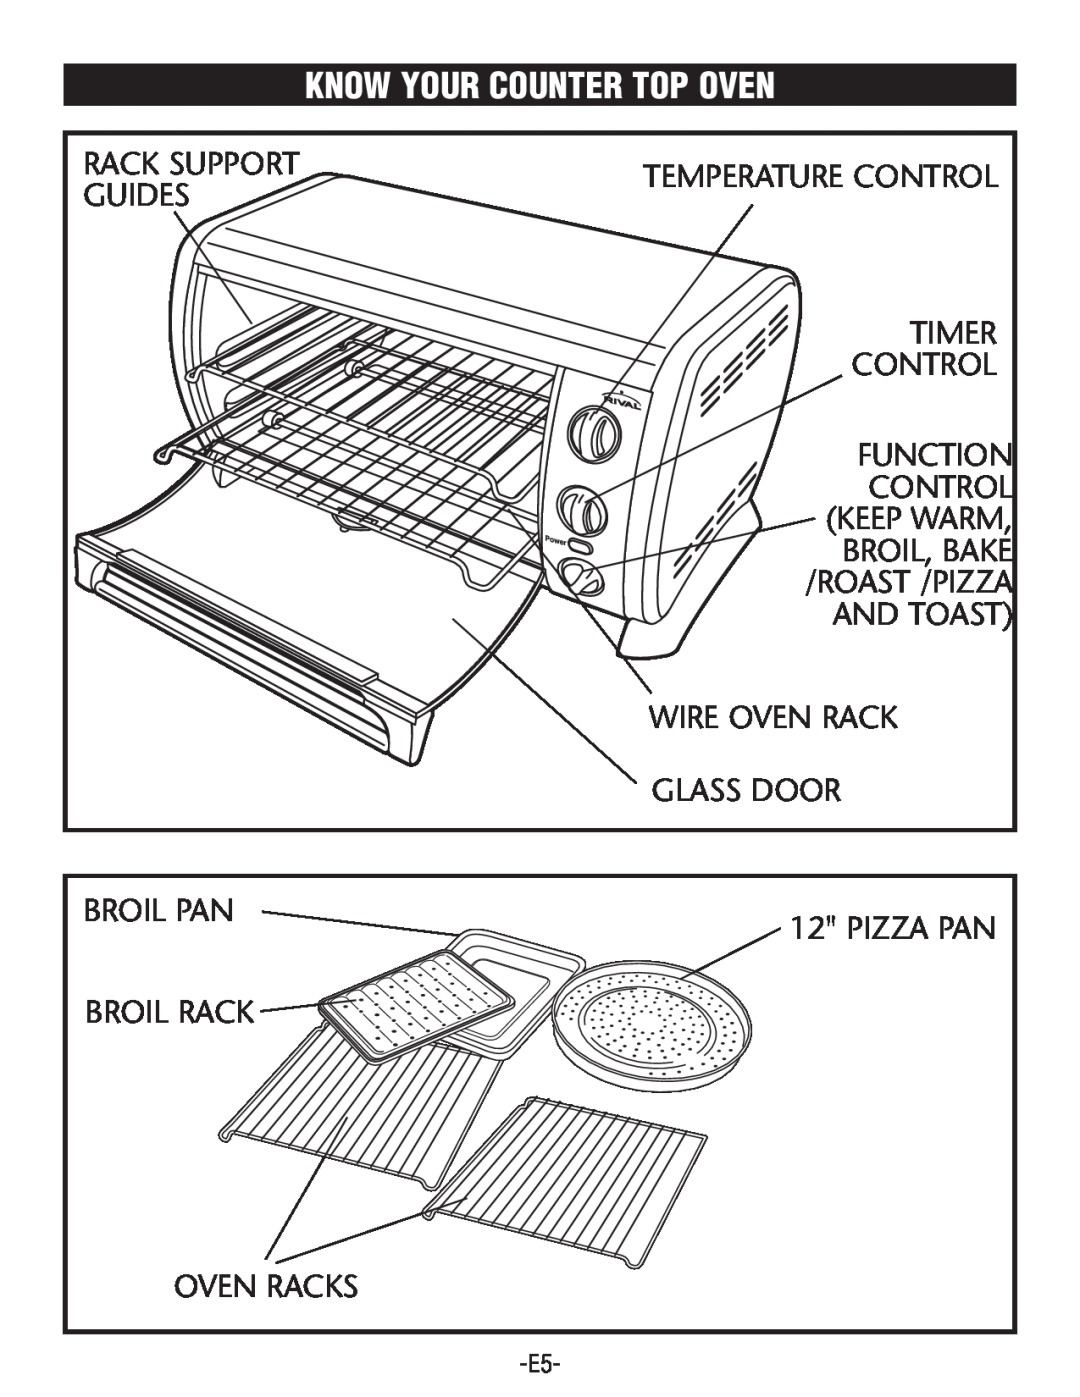 Rival CO602 manual Know Your Counter Top Oven, Temperature Control, Wire Oven Rack, Glass Door 